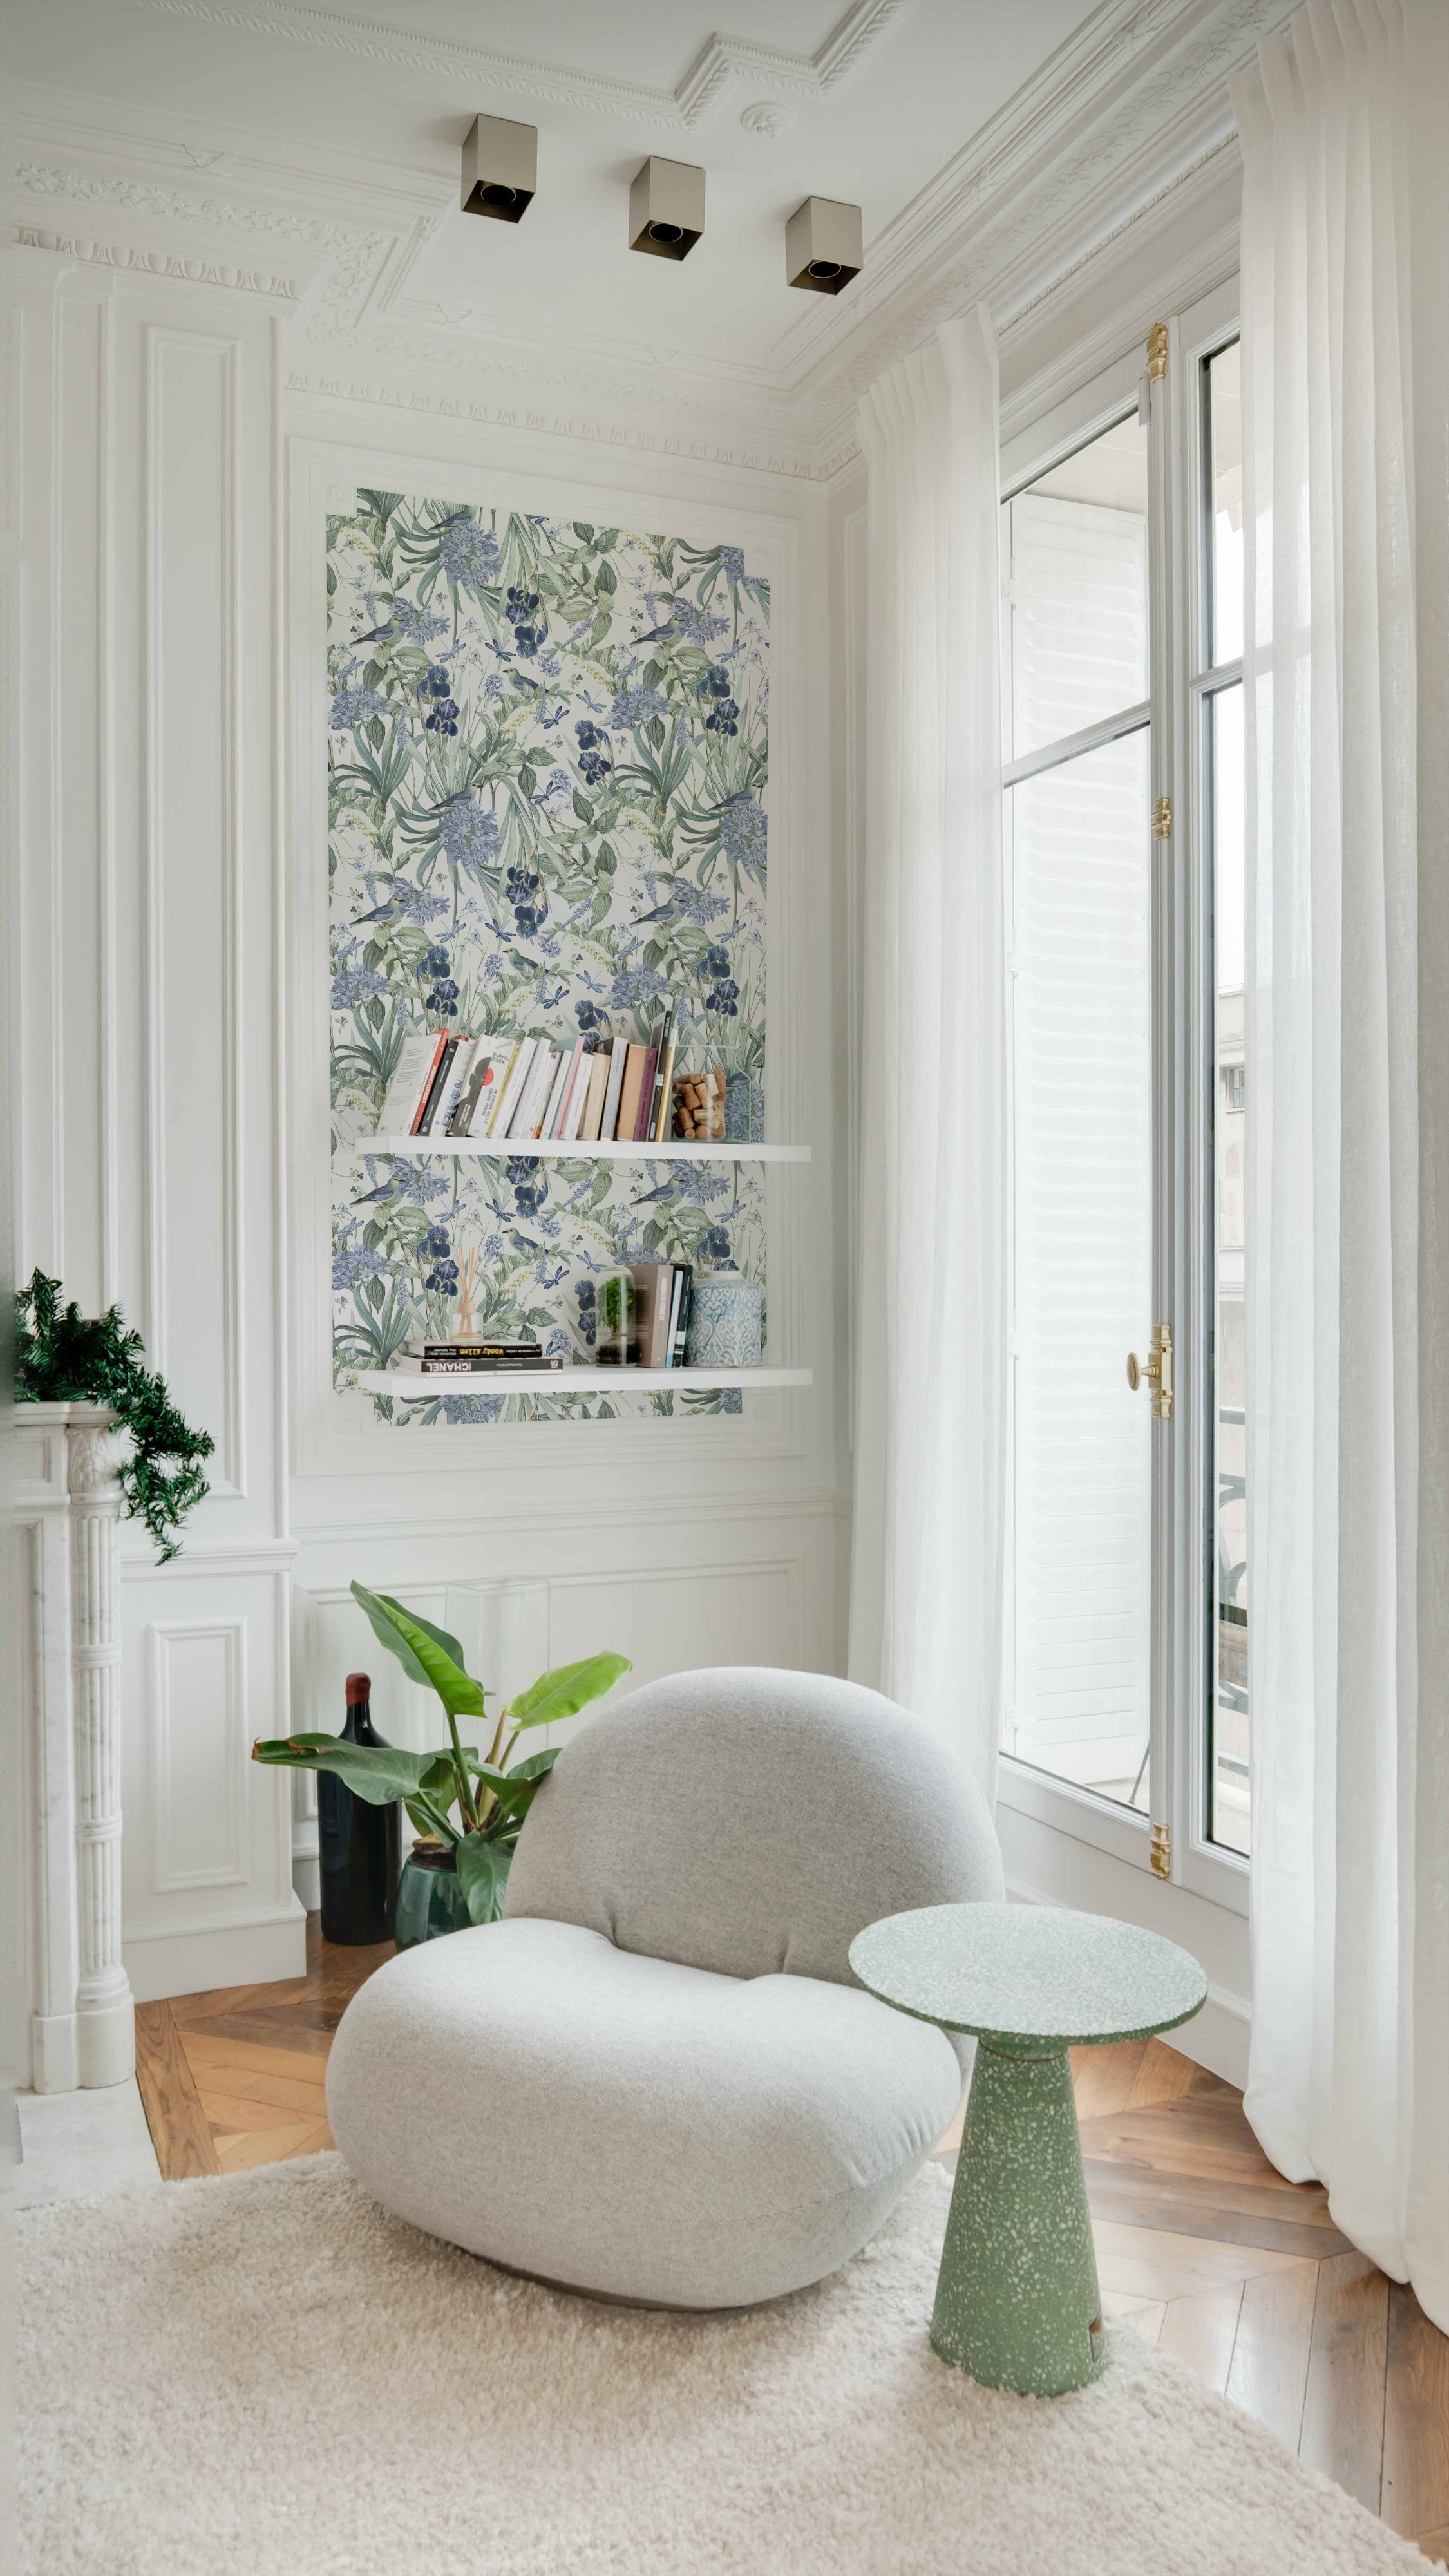 An elegant living space with Mint Floral Wallpaper used as a feature wall behind white floating shelves. The wallpaper adds a refreshing botanical vibe with its detailed depiction of birds and flowers, enhancing the light and airy feel of the room.